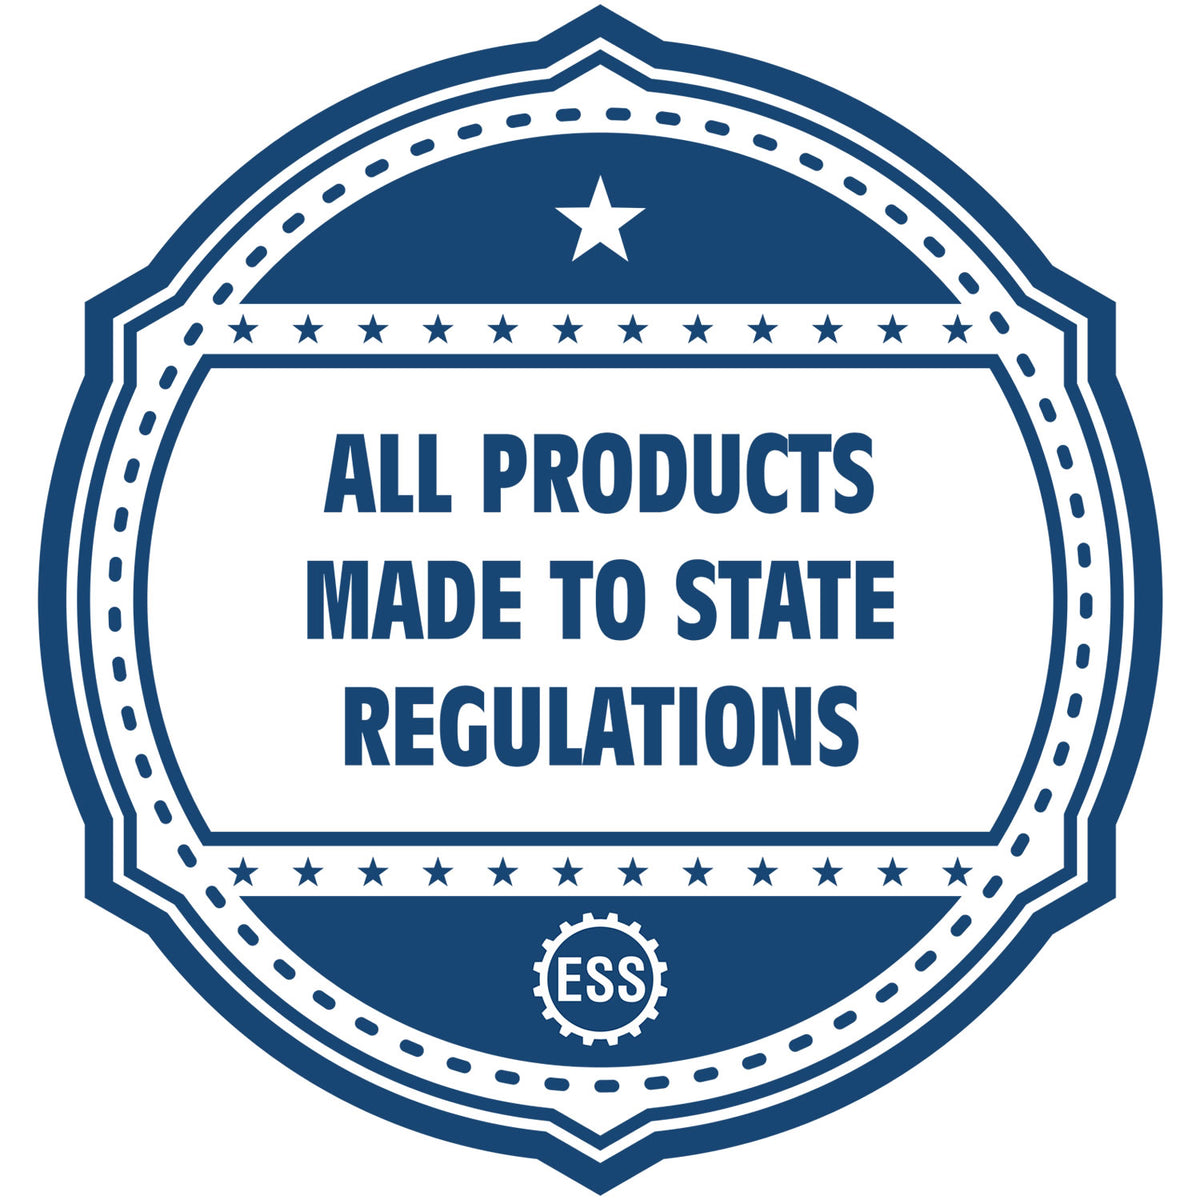 A blue icon or badge for the Heavy Duty Cast Iron New Jersey Geologist Seal Embosser showing that this product is made in compliance with state regulations.